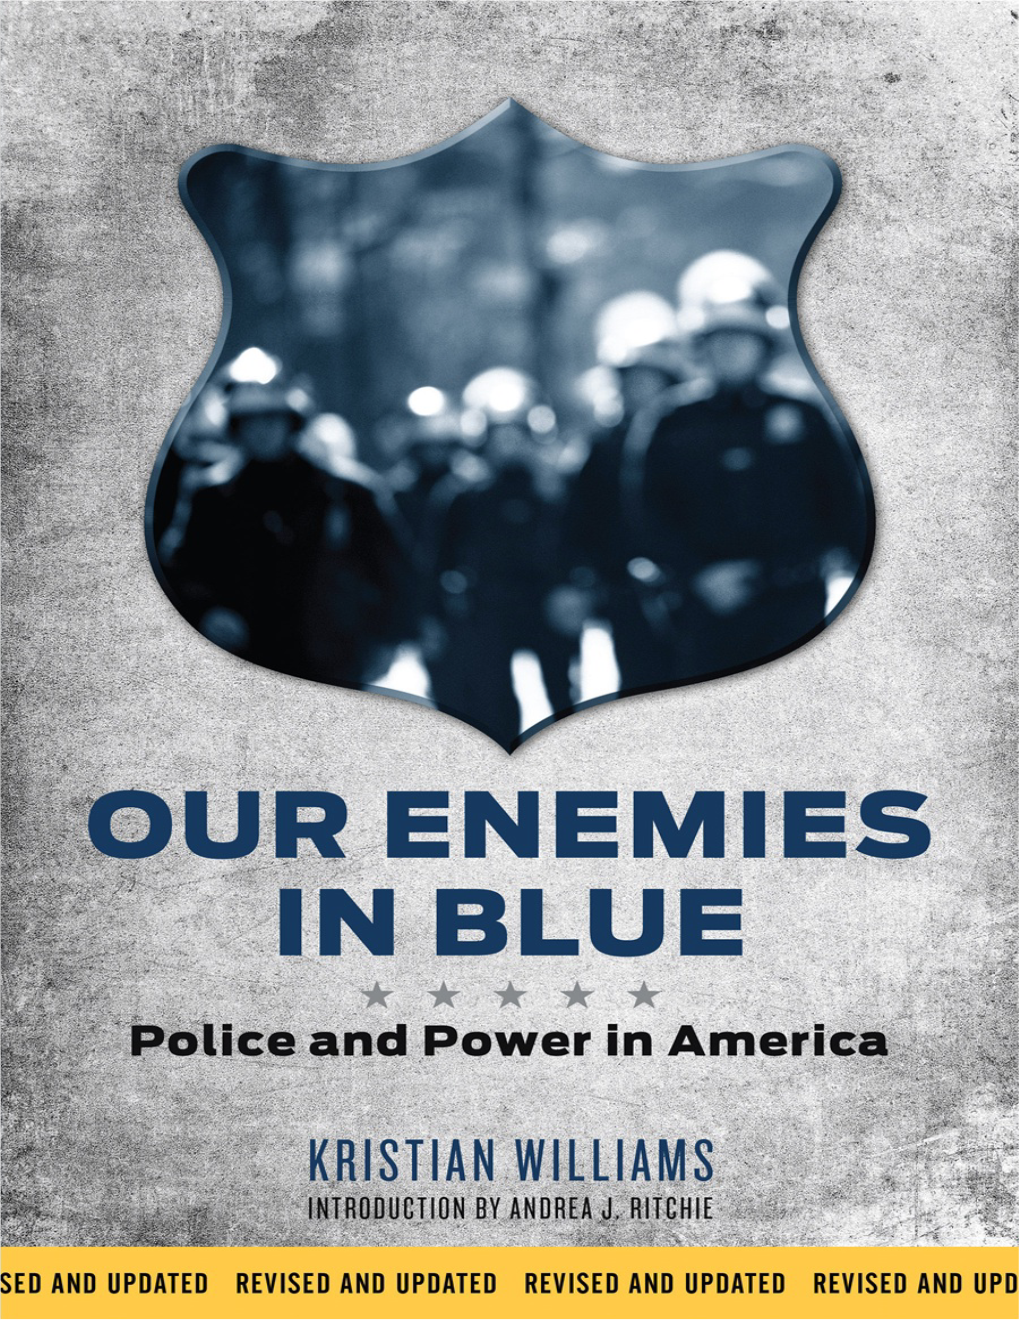 Our Enemies in Blue First Appeared in 2004, Ten Years Before the Events Described Above